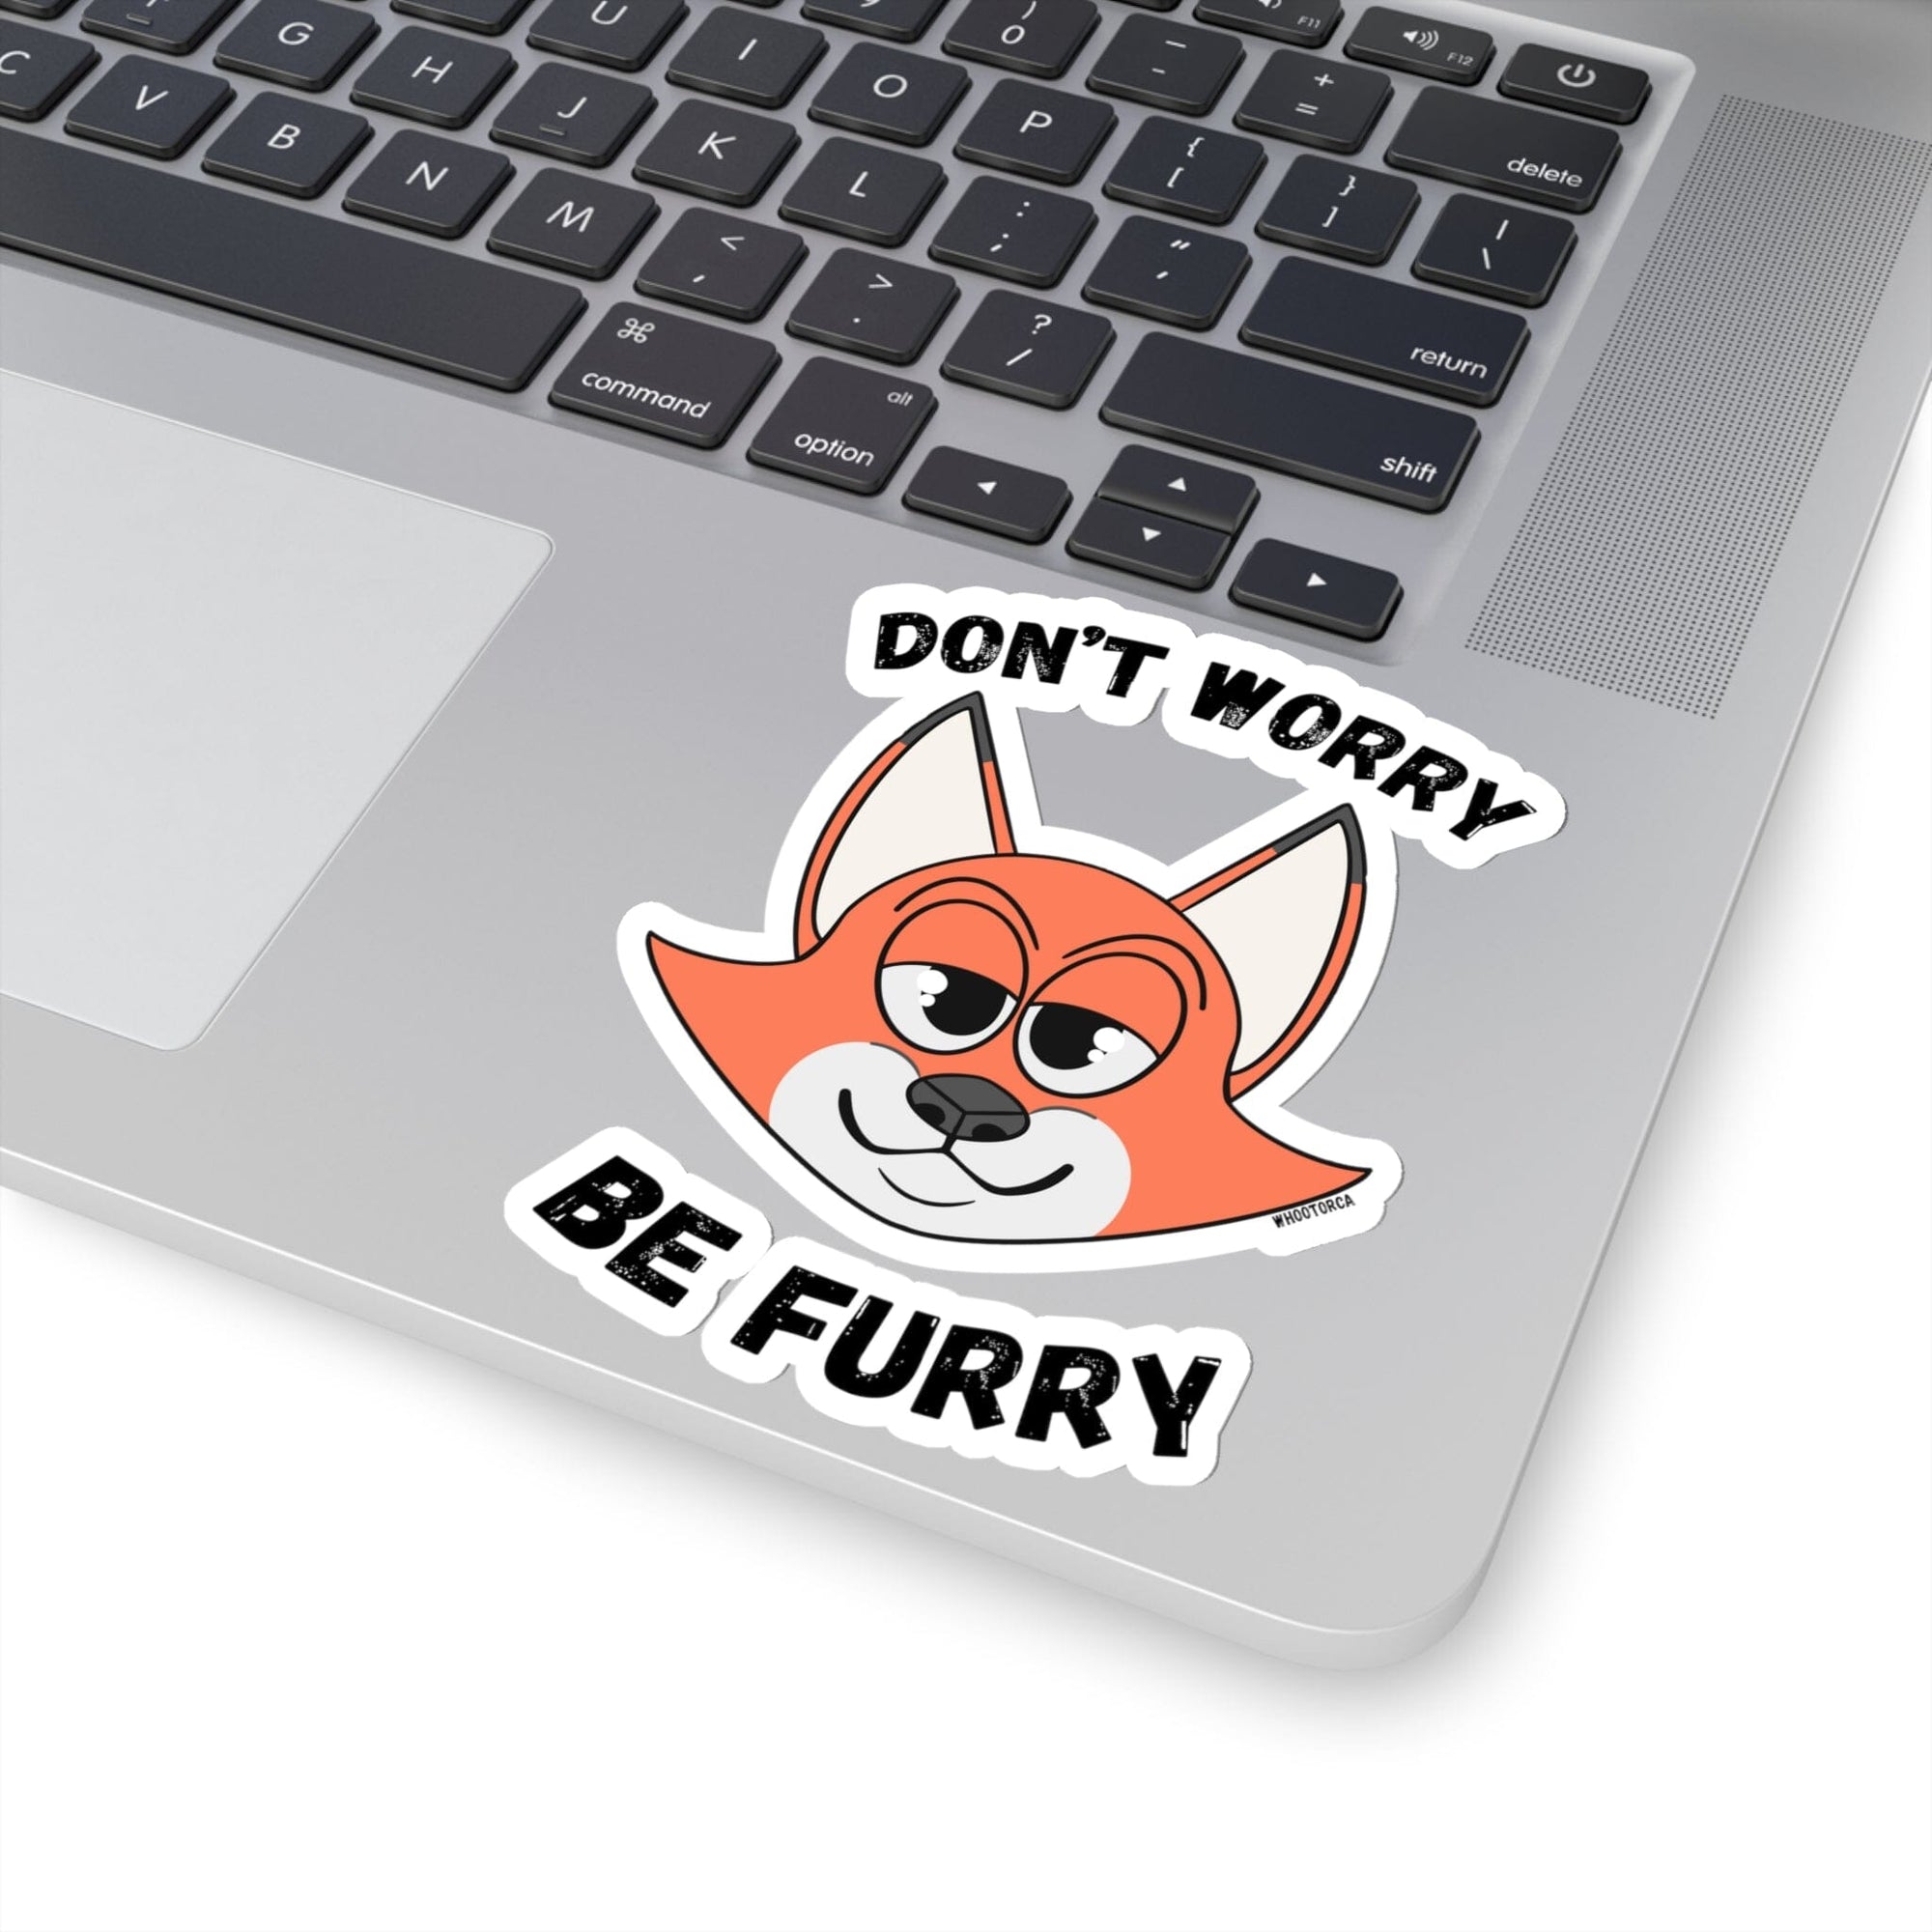 Don't Worry Be Furry! - Sticker Sticker AFLT-Whootorca 